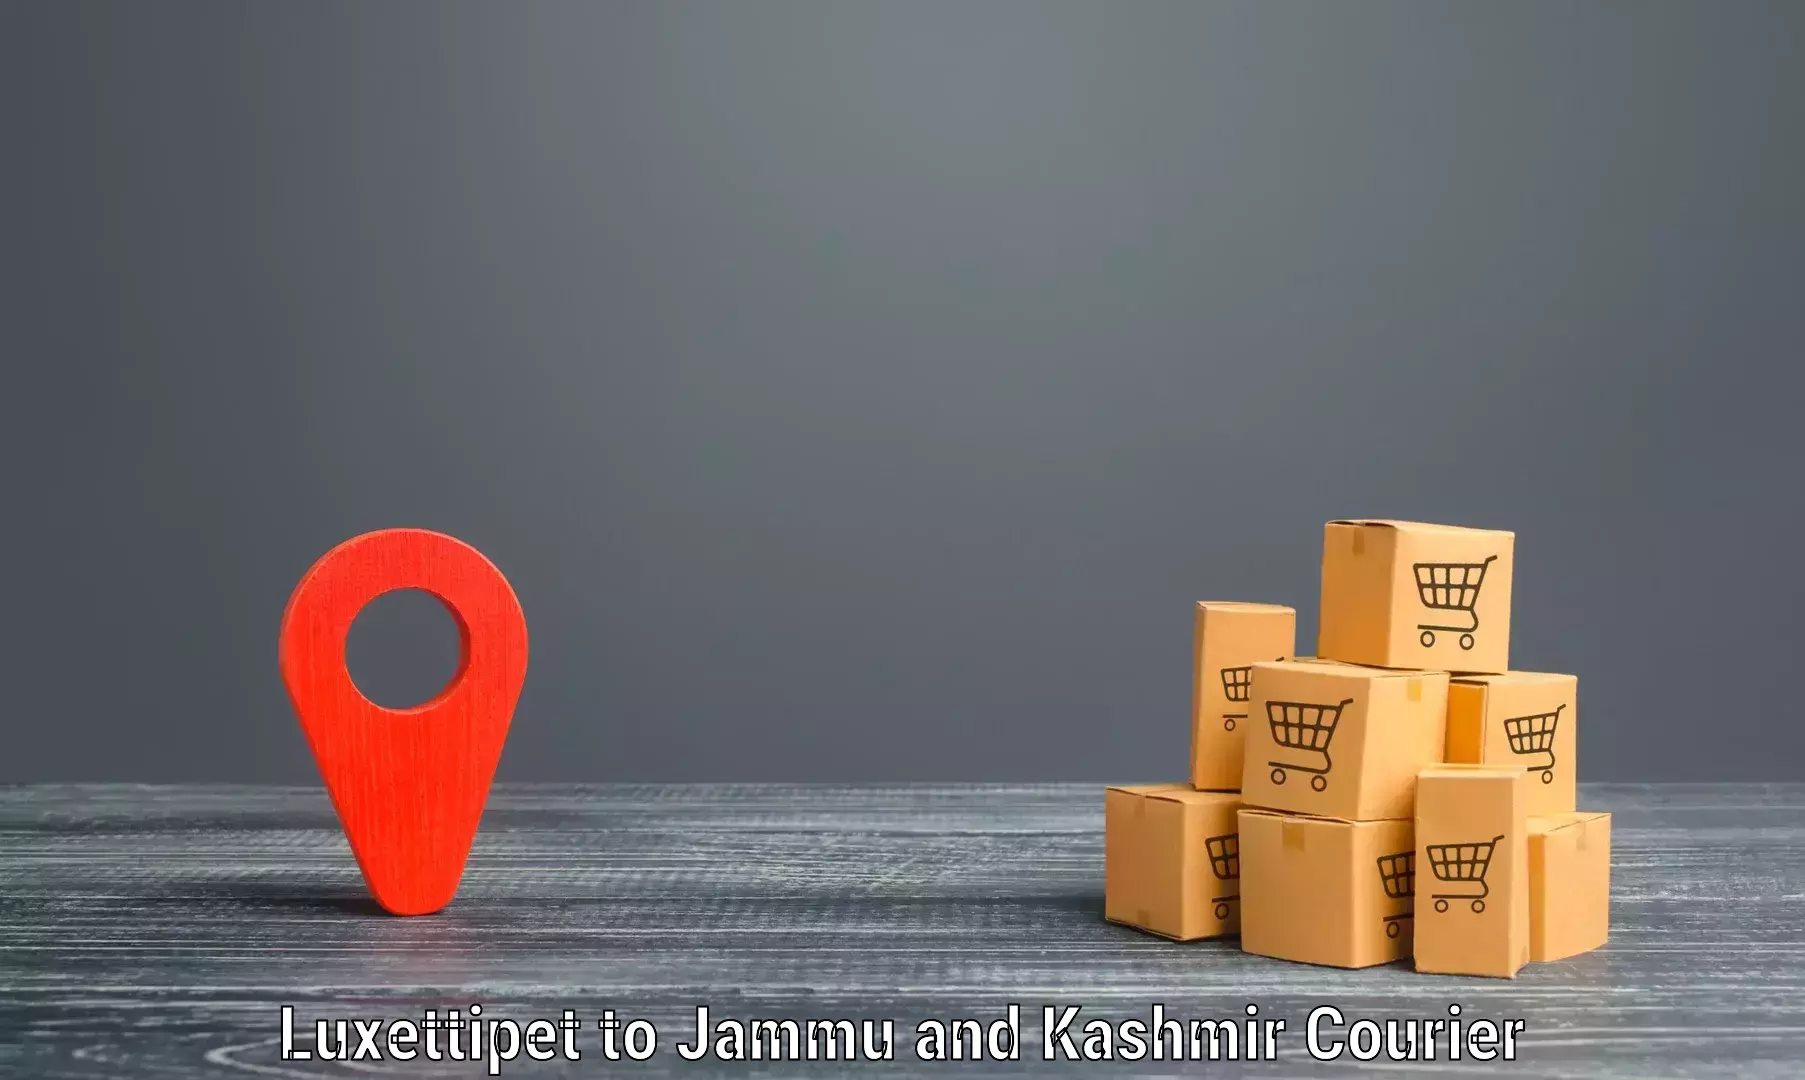 Customer-friendly courier services in Luxettipet to Katra